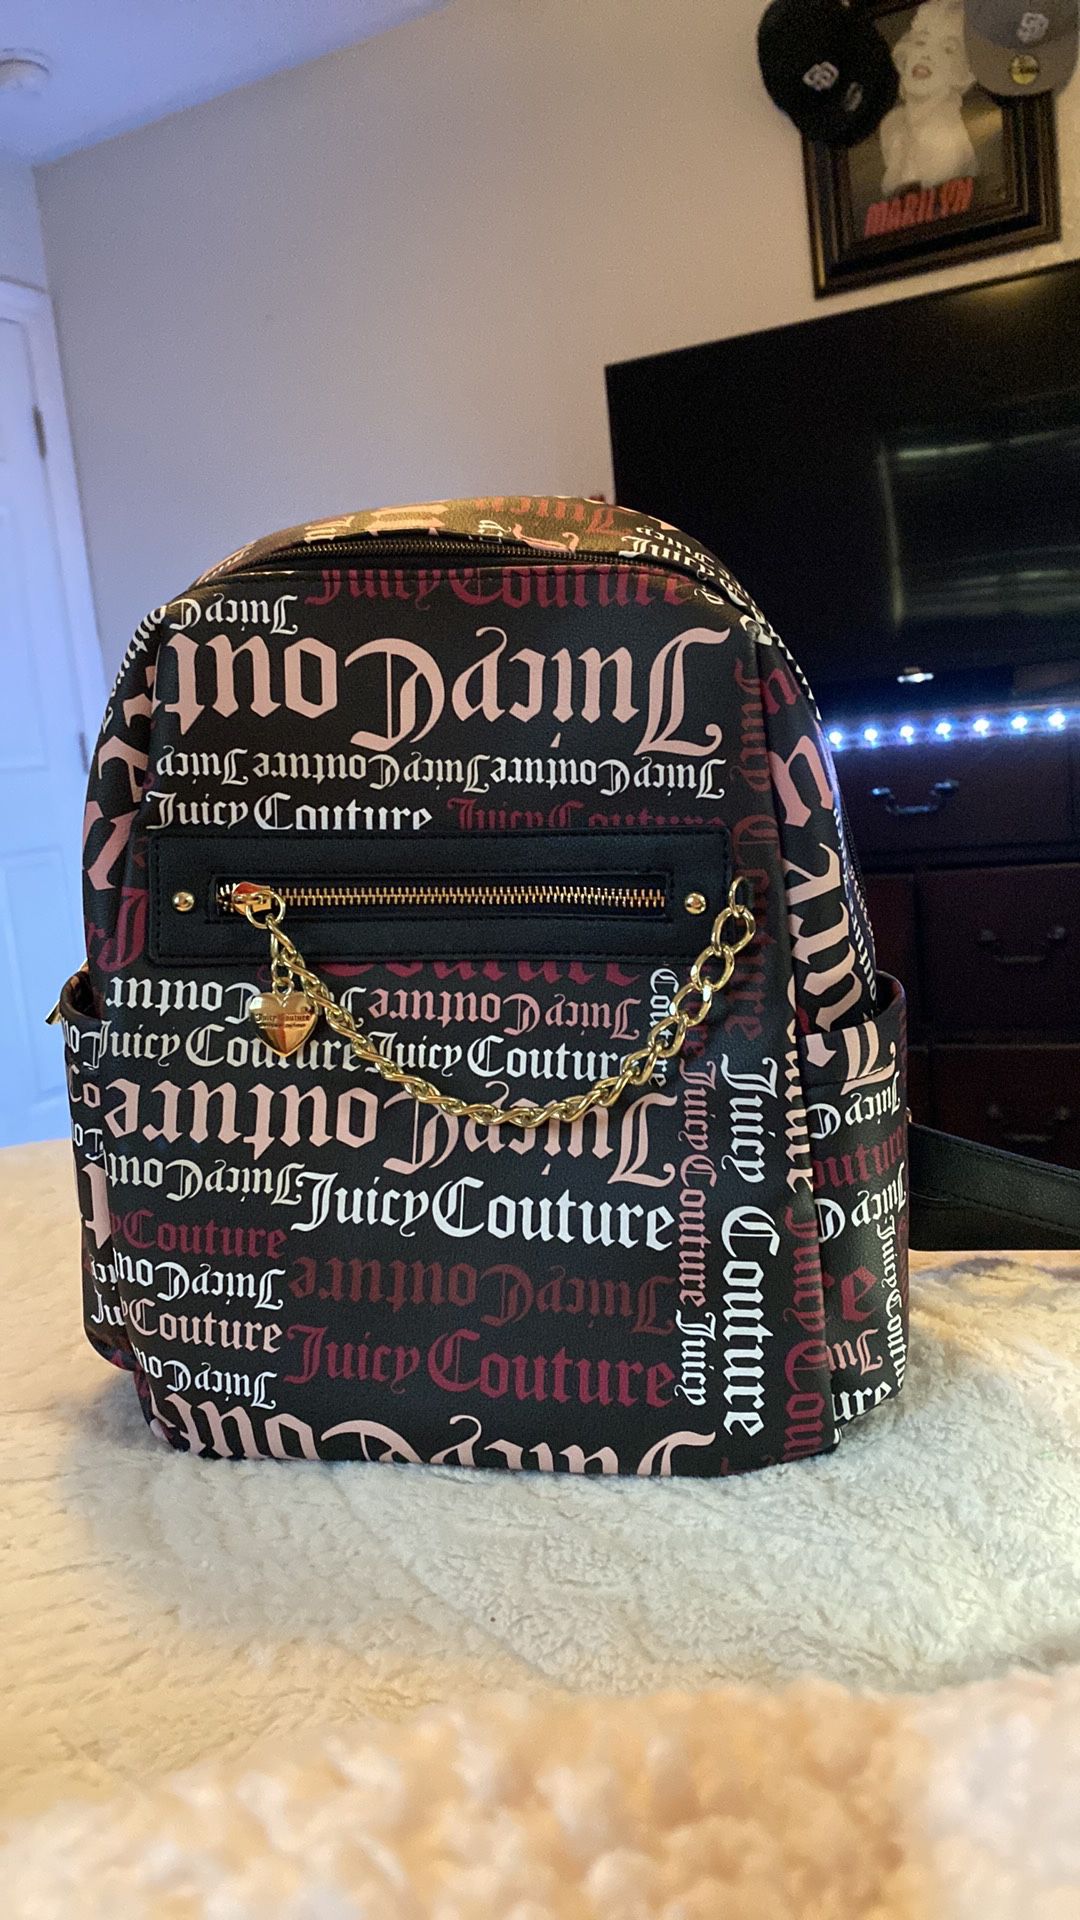 Juicy By Couture Backpack